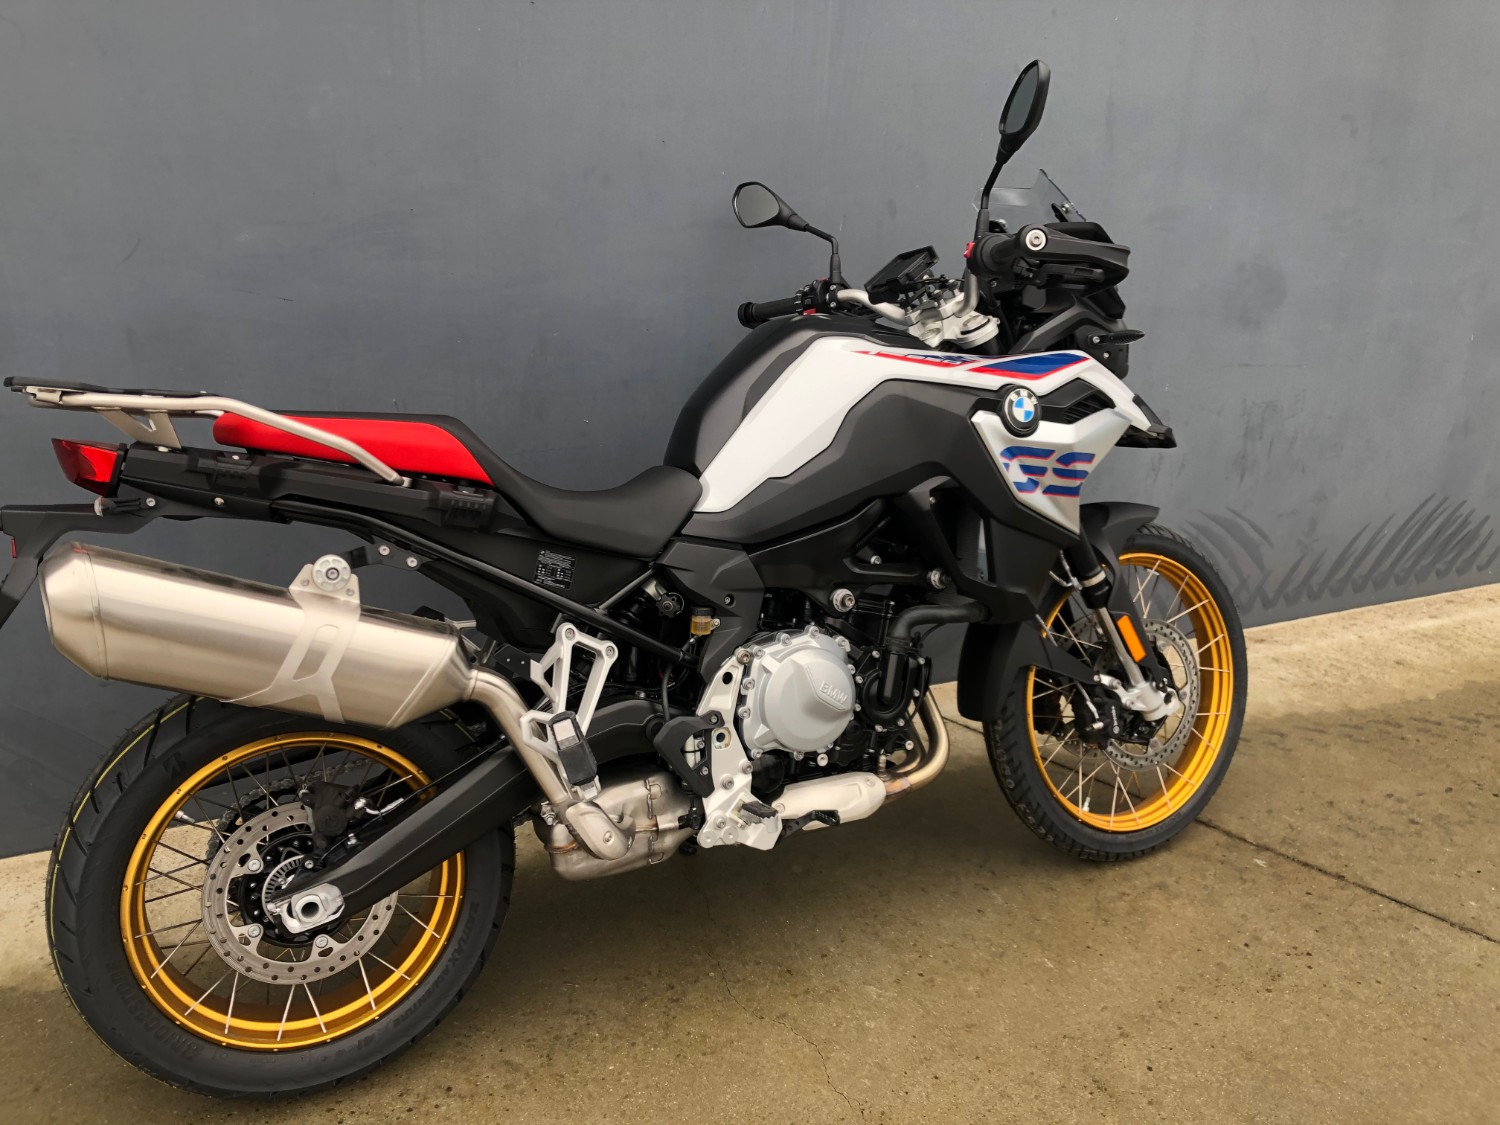 2019 BMW F850GS RallyE Low Suspension Motorcycle Image 19